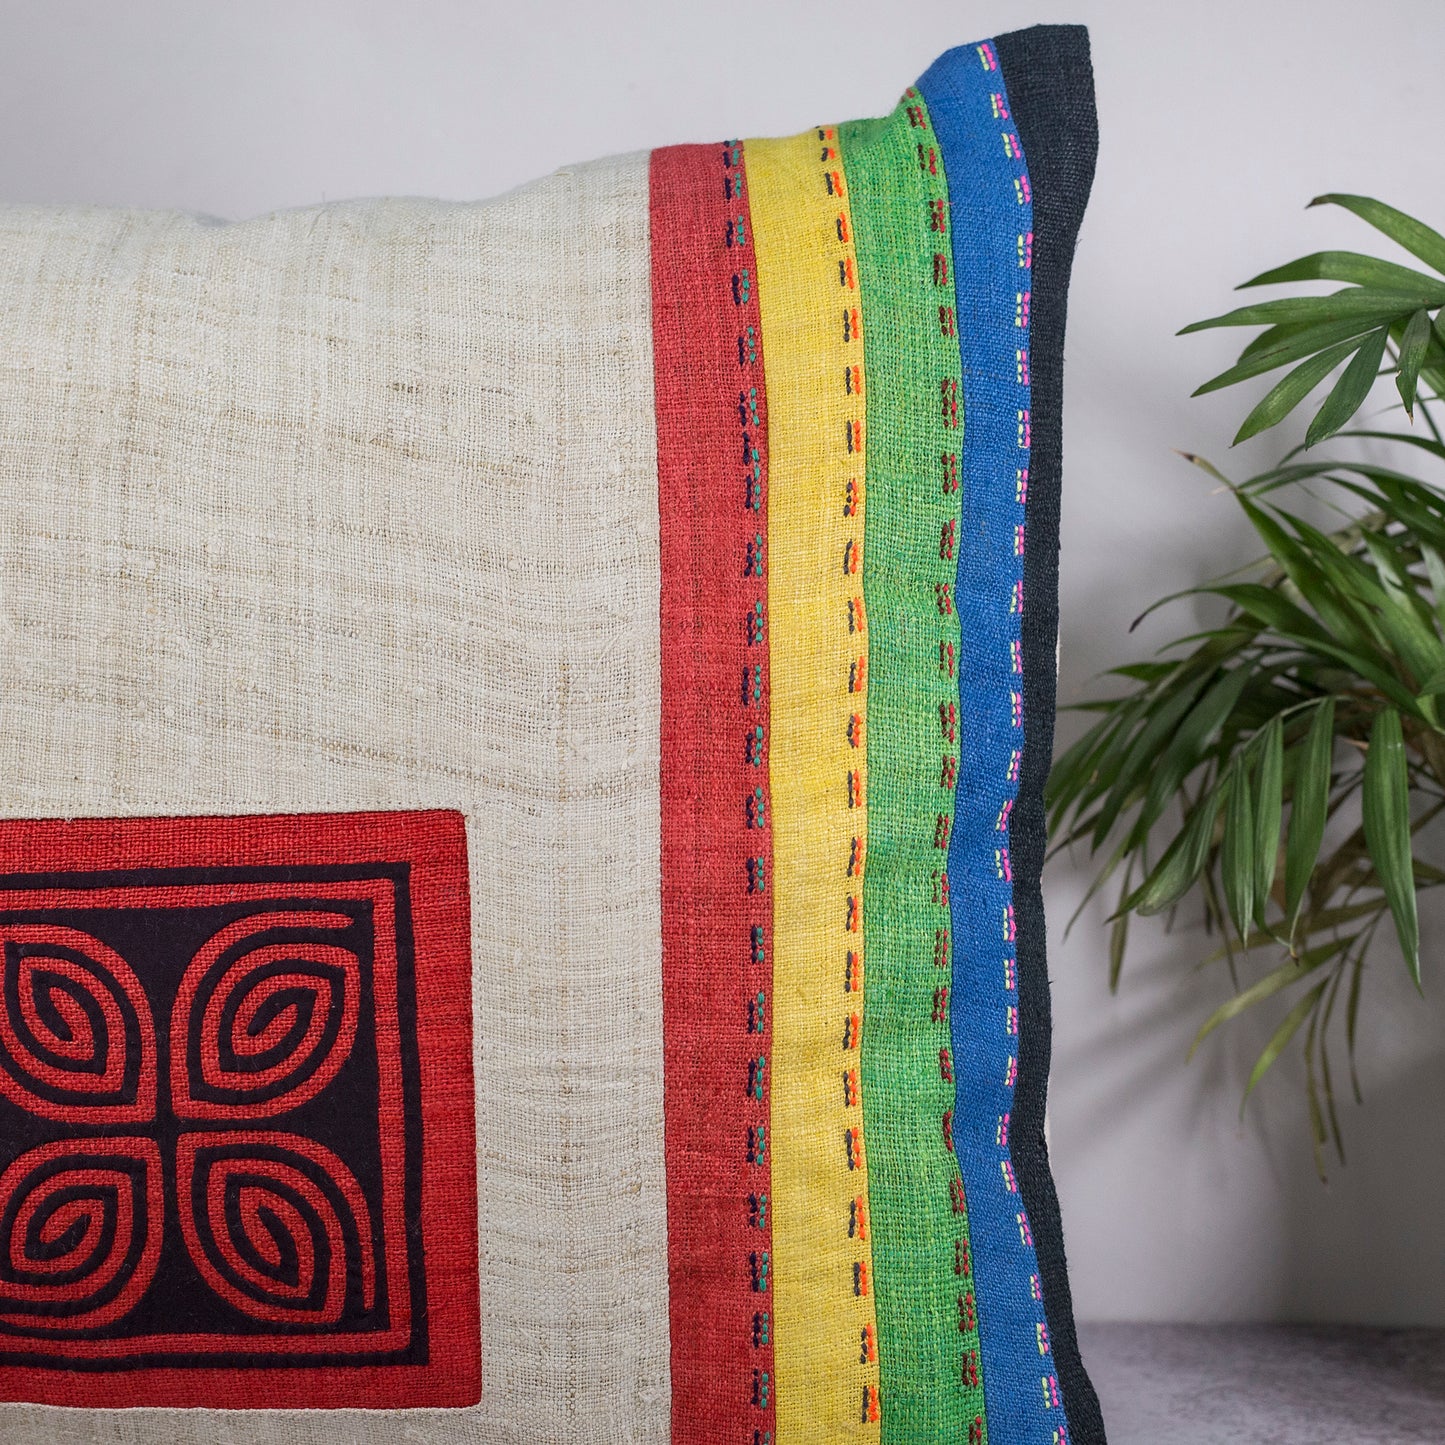 Beige Hemp Cushion Cover with stripes in different colors, hand-stitched pattern in black and red